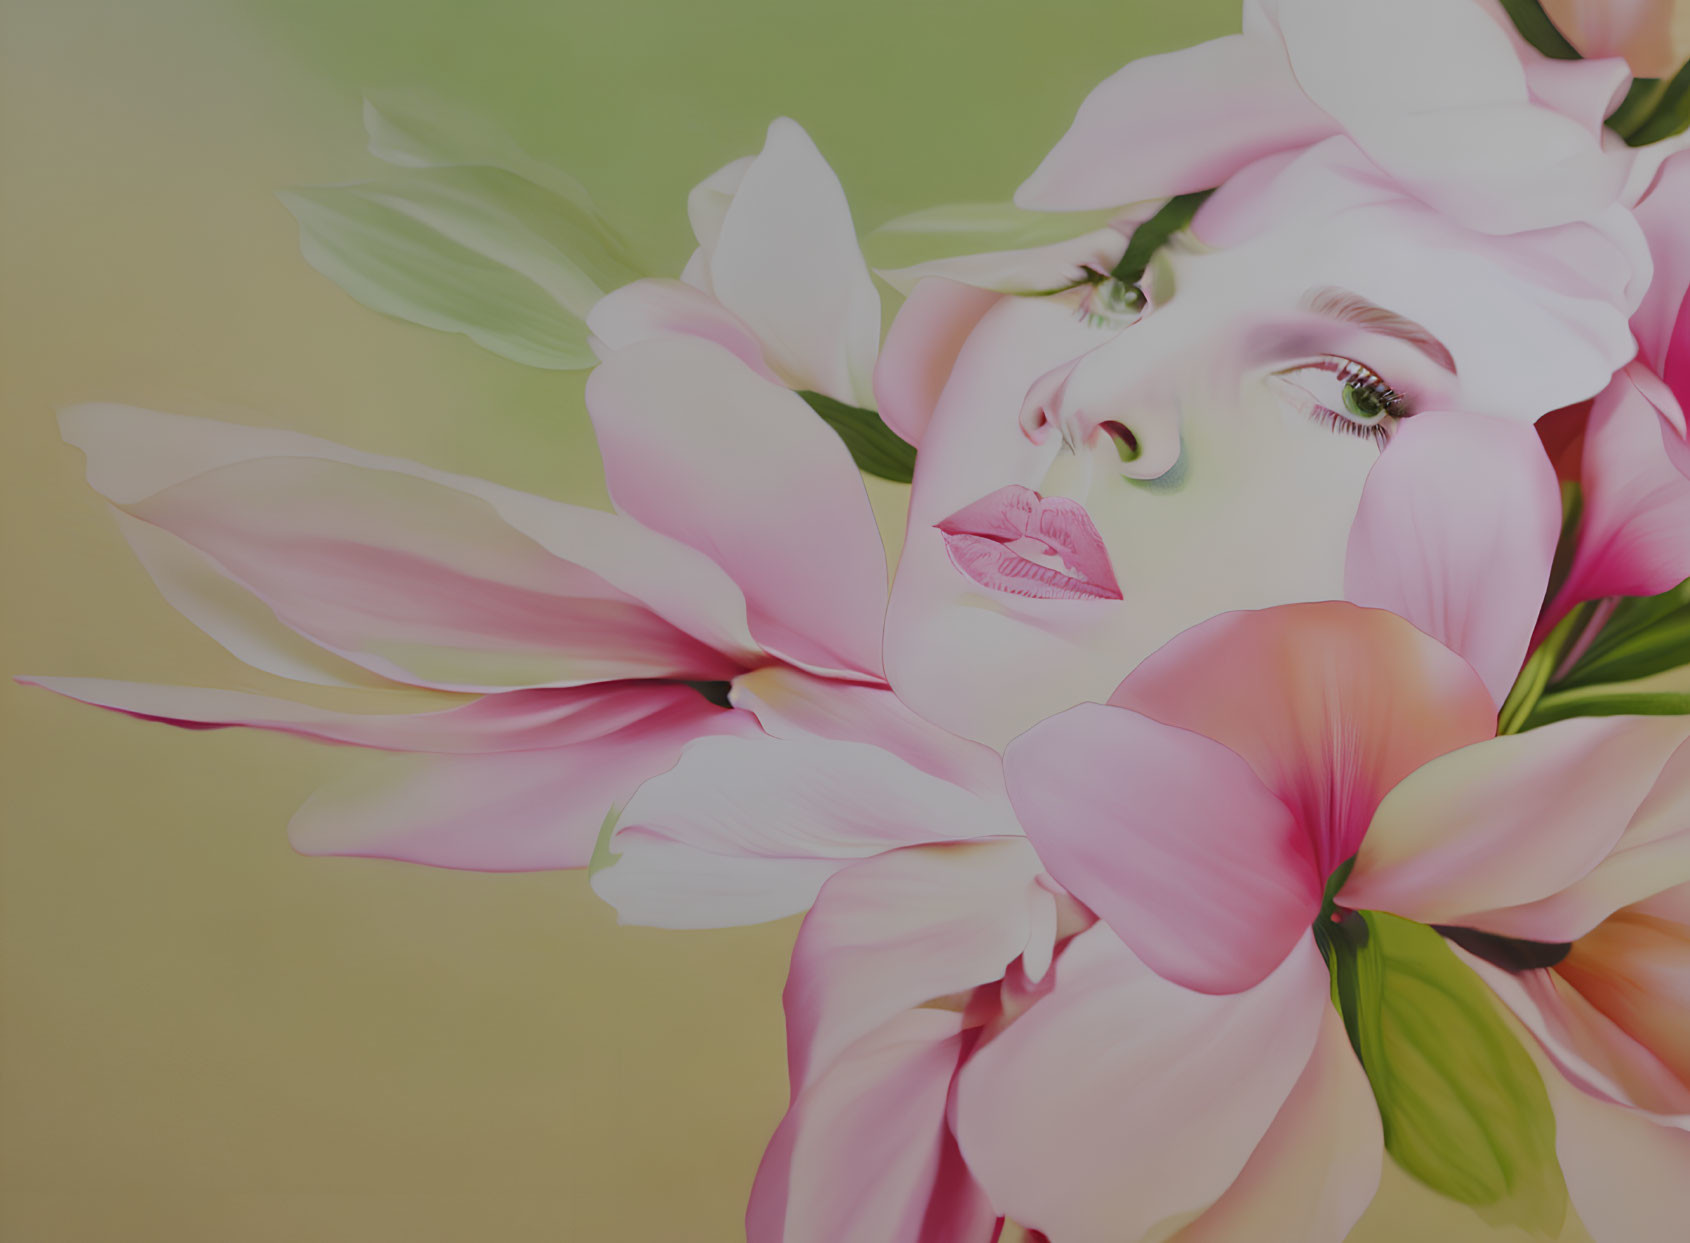 Surreal portrait: Woman's face in pink flower petals on green background